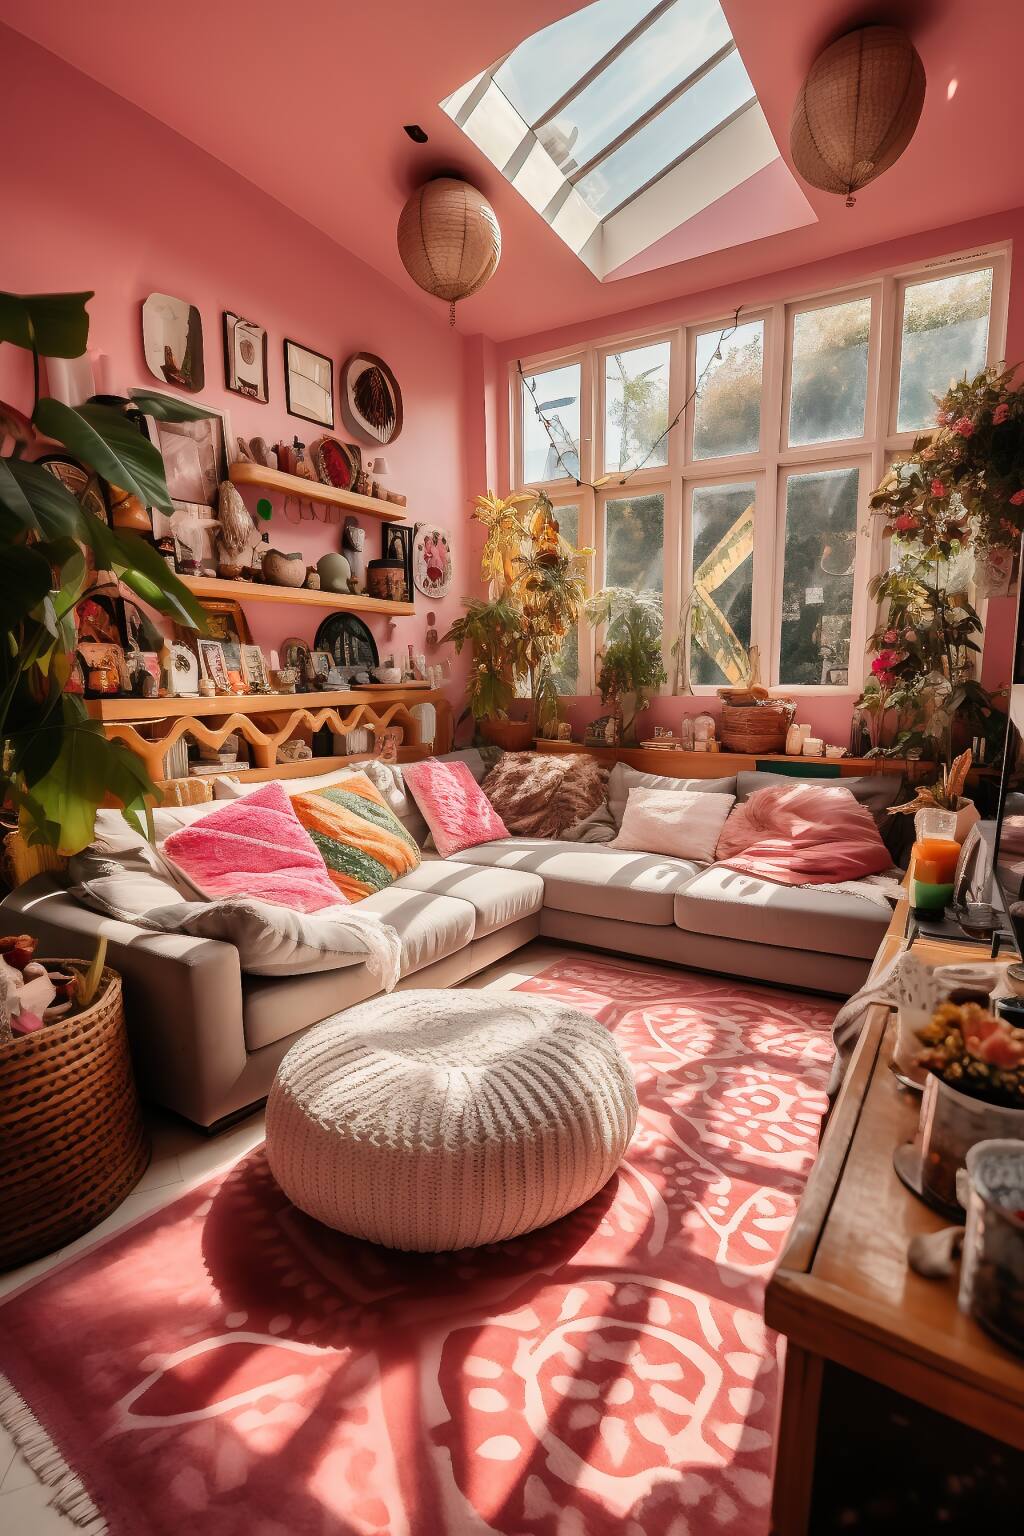 A Cozy Romantic Bohemian Living Room With Pink Walls, Modular Sofas With Colorful Pillows, Indoor Plants, And Sun Streaming Through The Skylight.